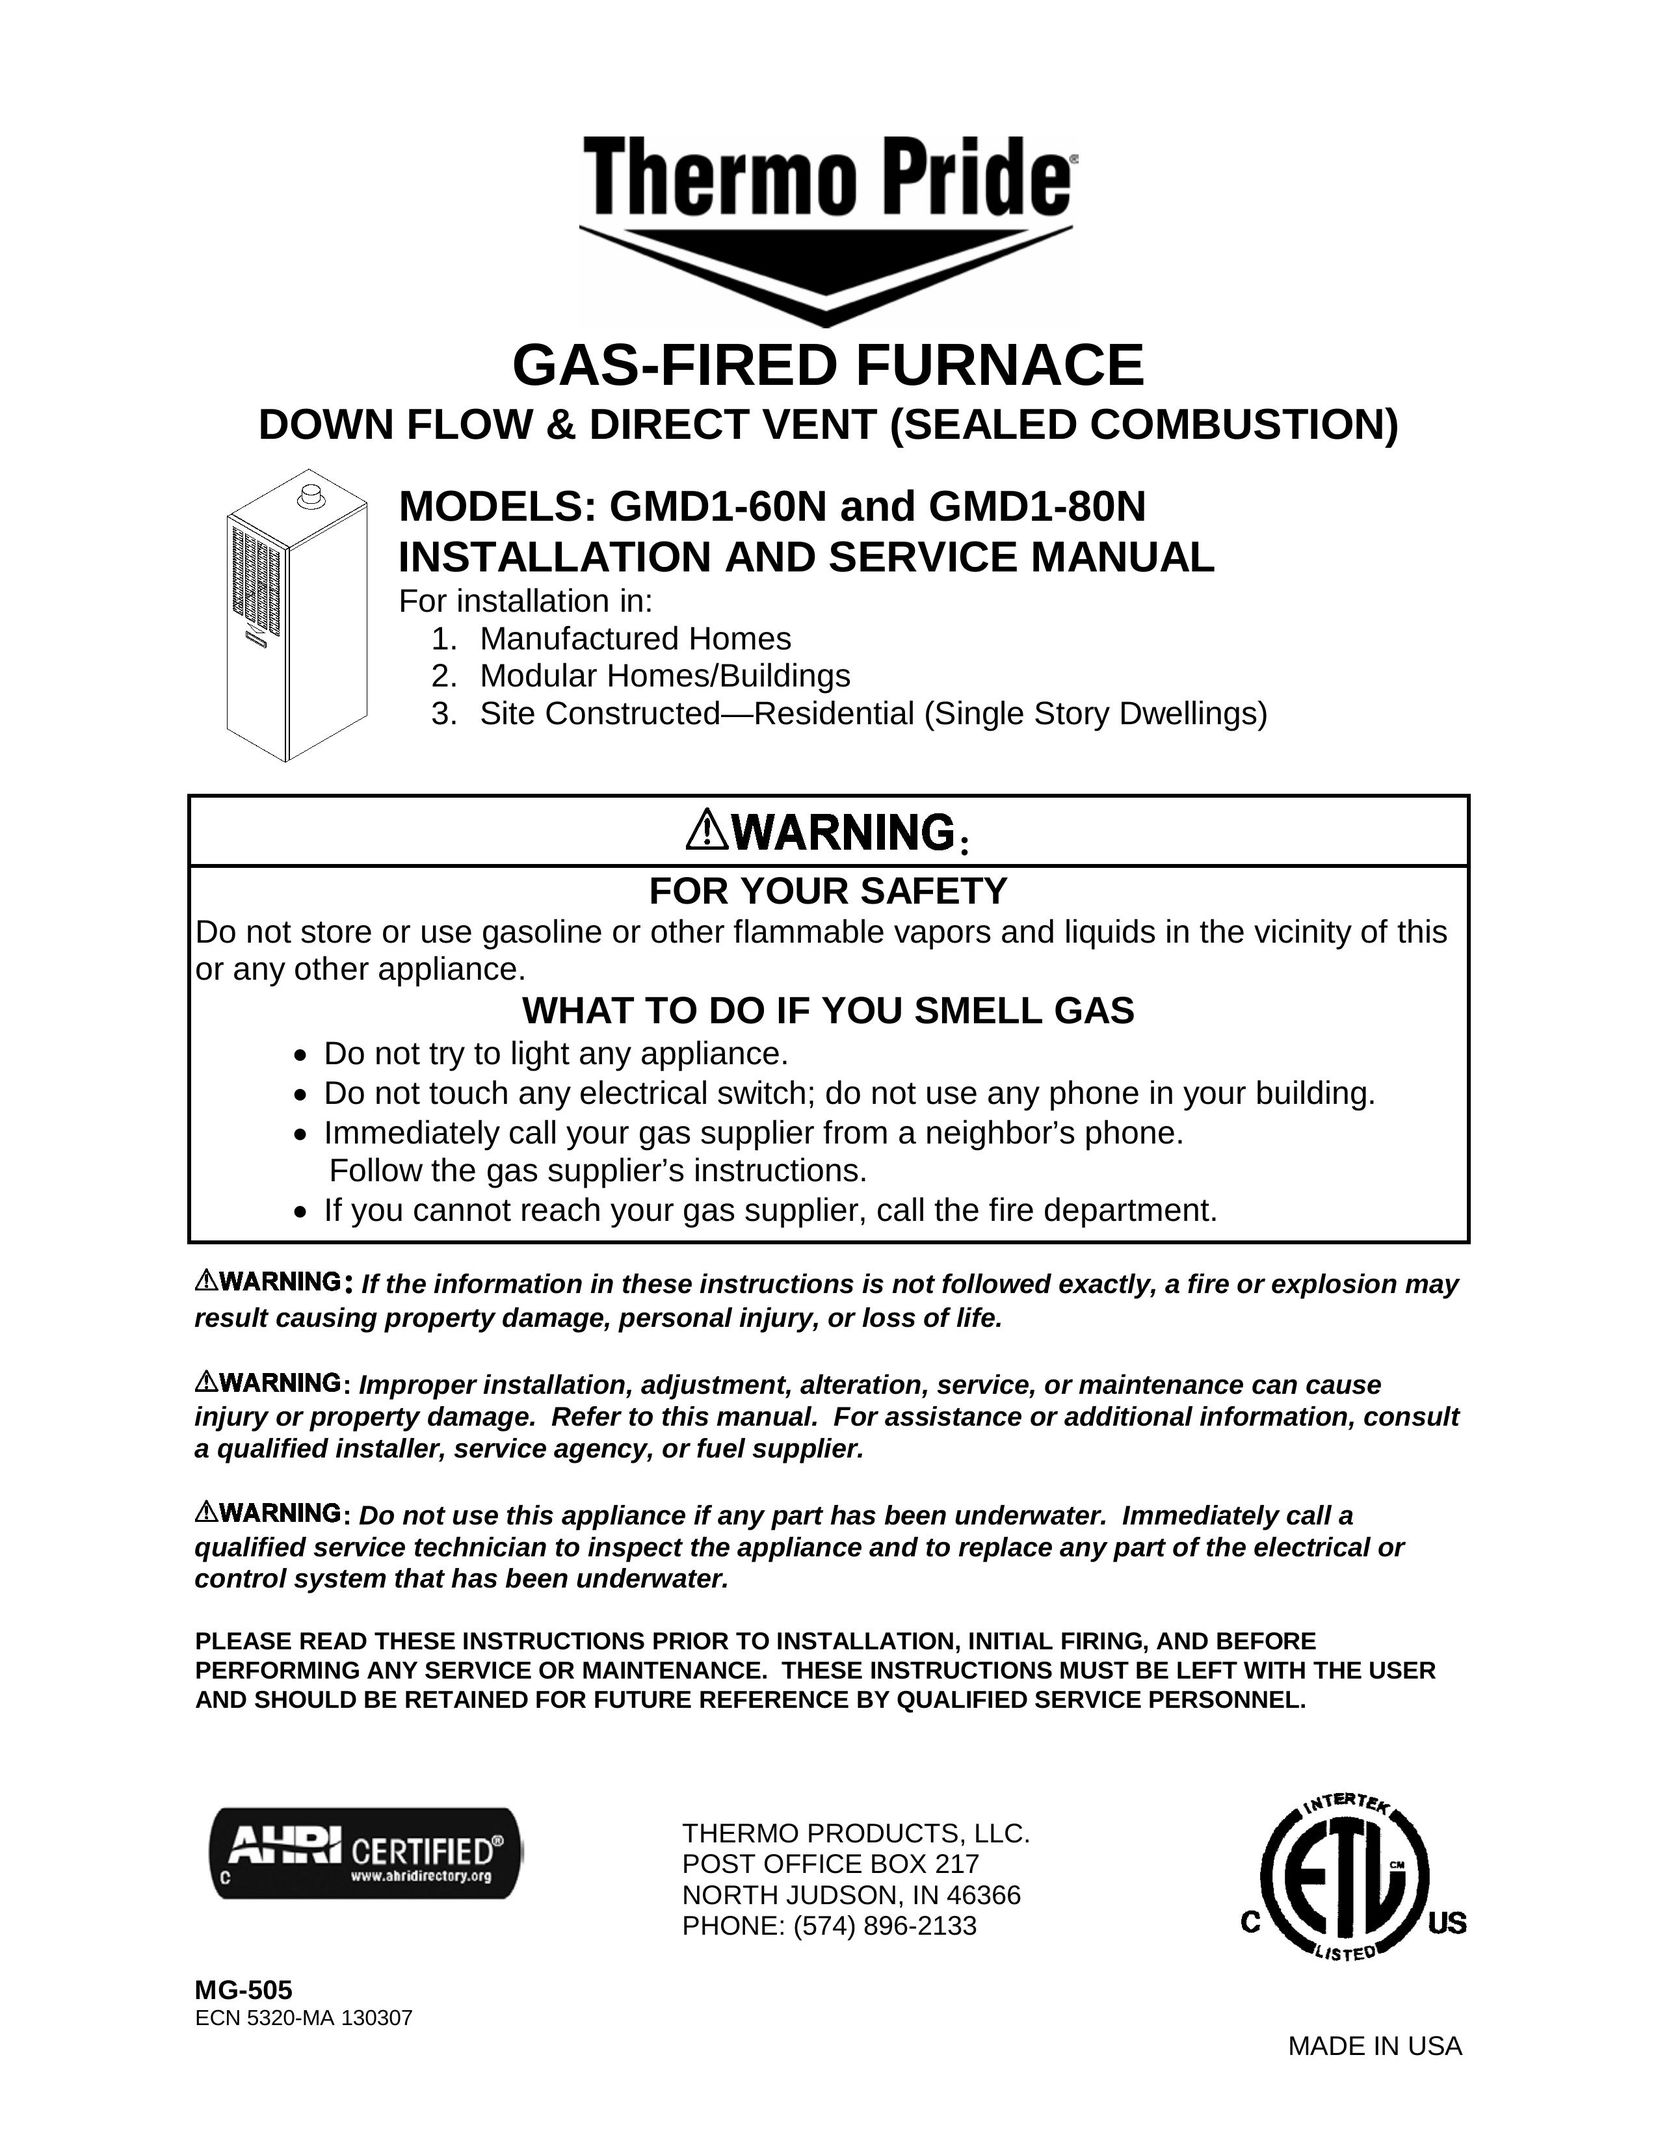 Thermo Products GDM1-80N Burner User Manual